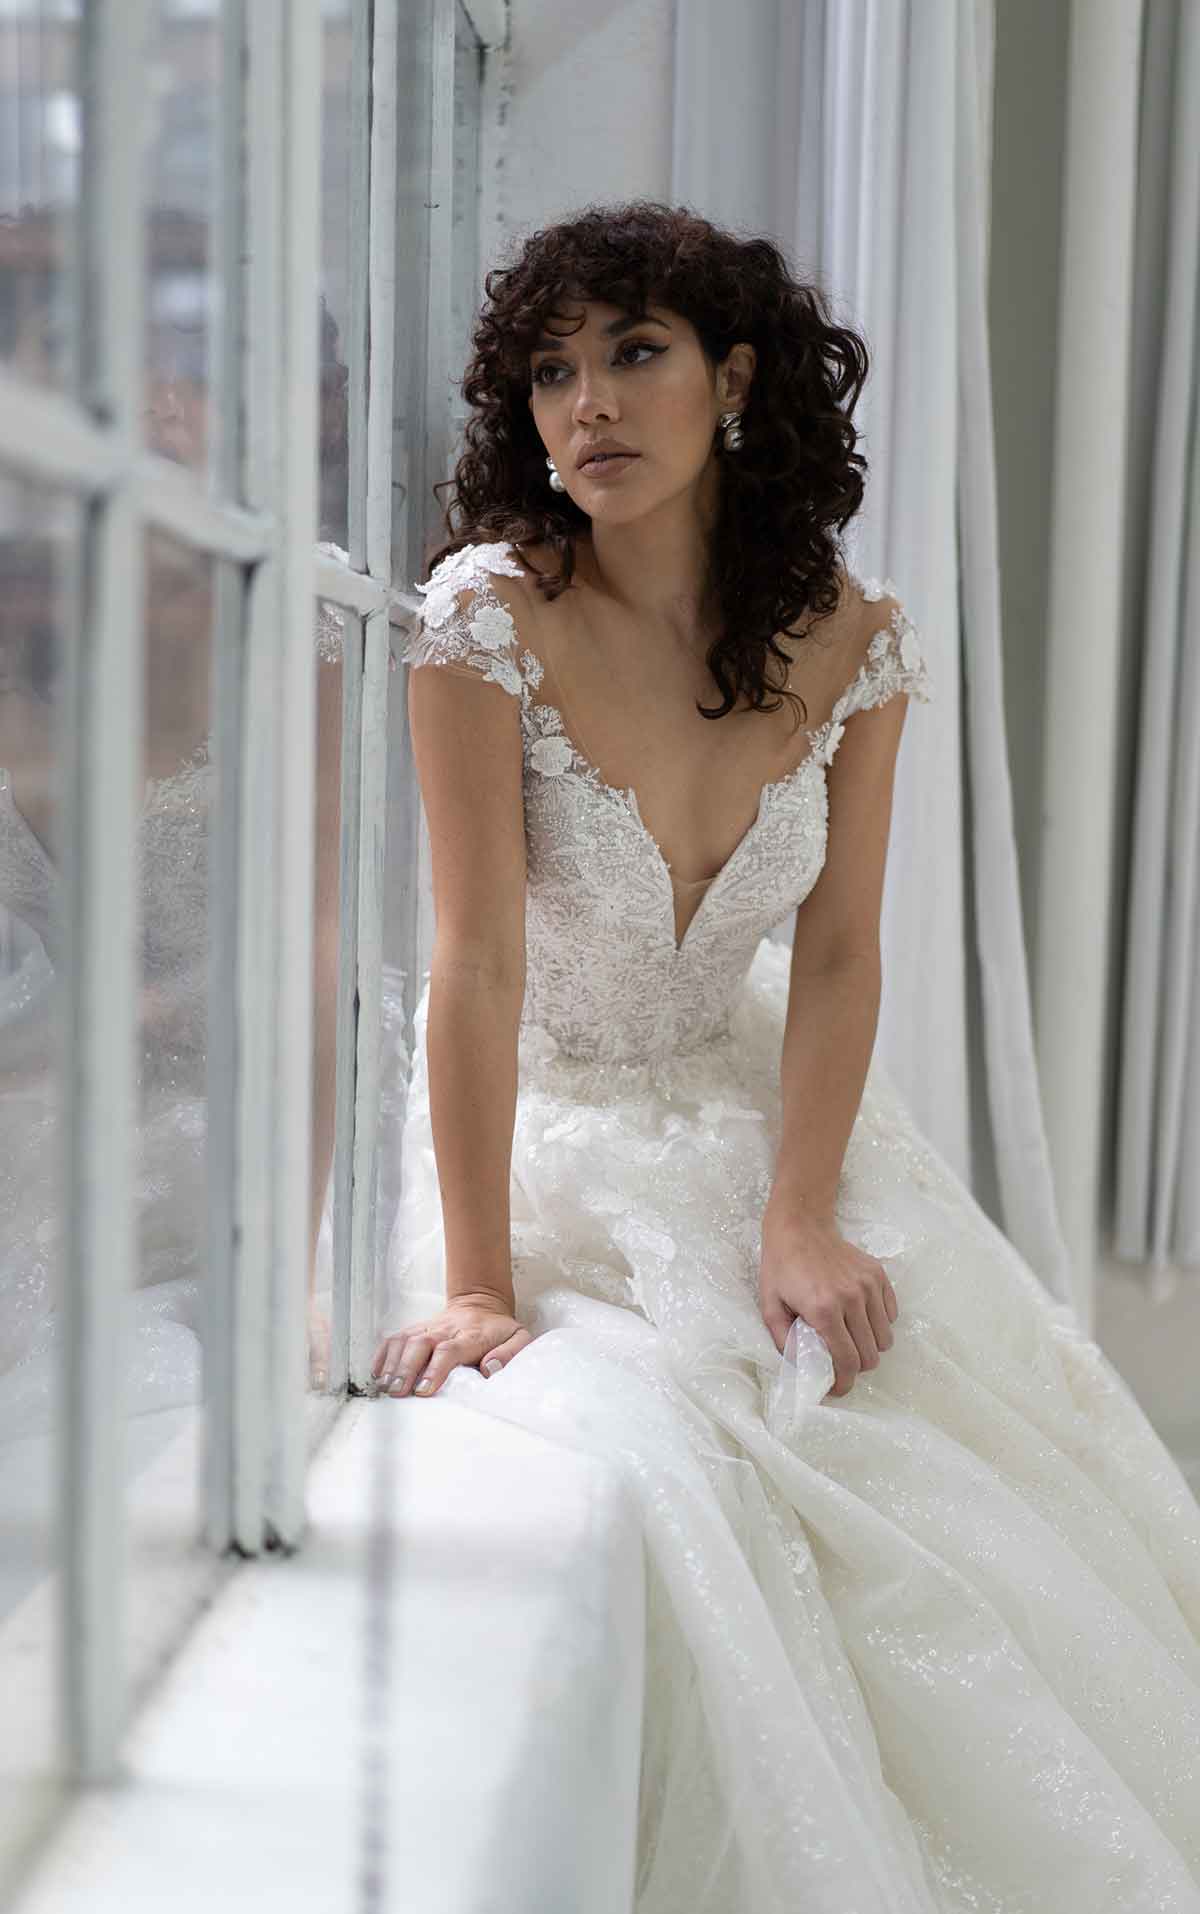 1371 Dramatic Sparkling Ballgown with Lace Details and Keyhole Back  by Martina Liana